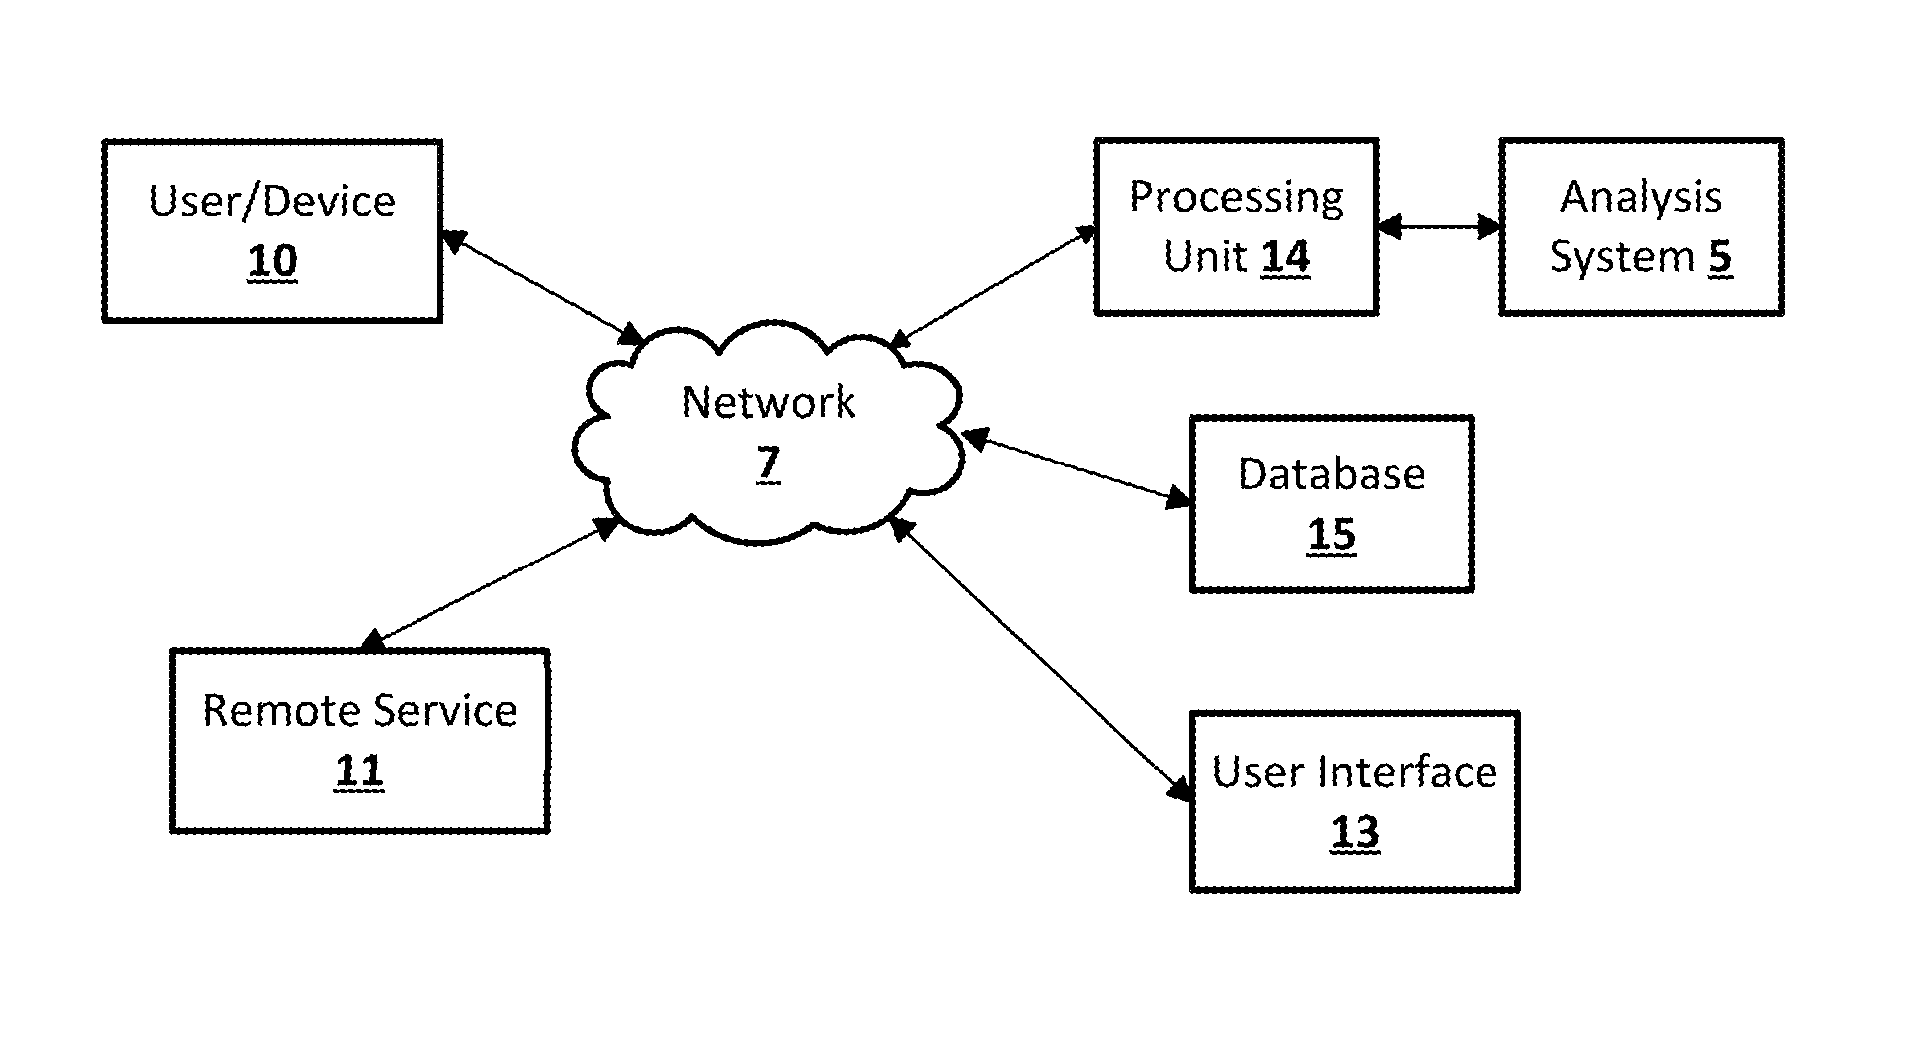 Content Recommendation System using a Neural Network Language Model